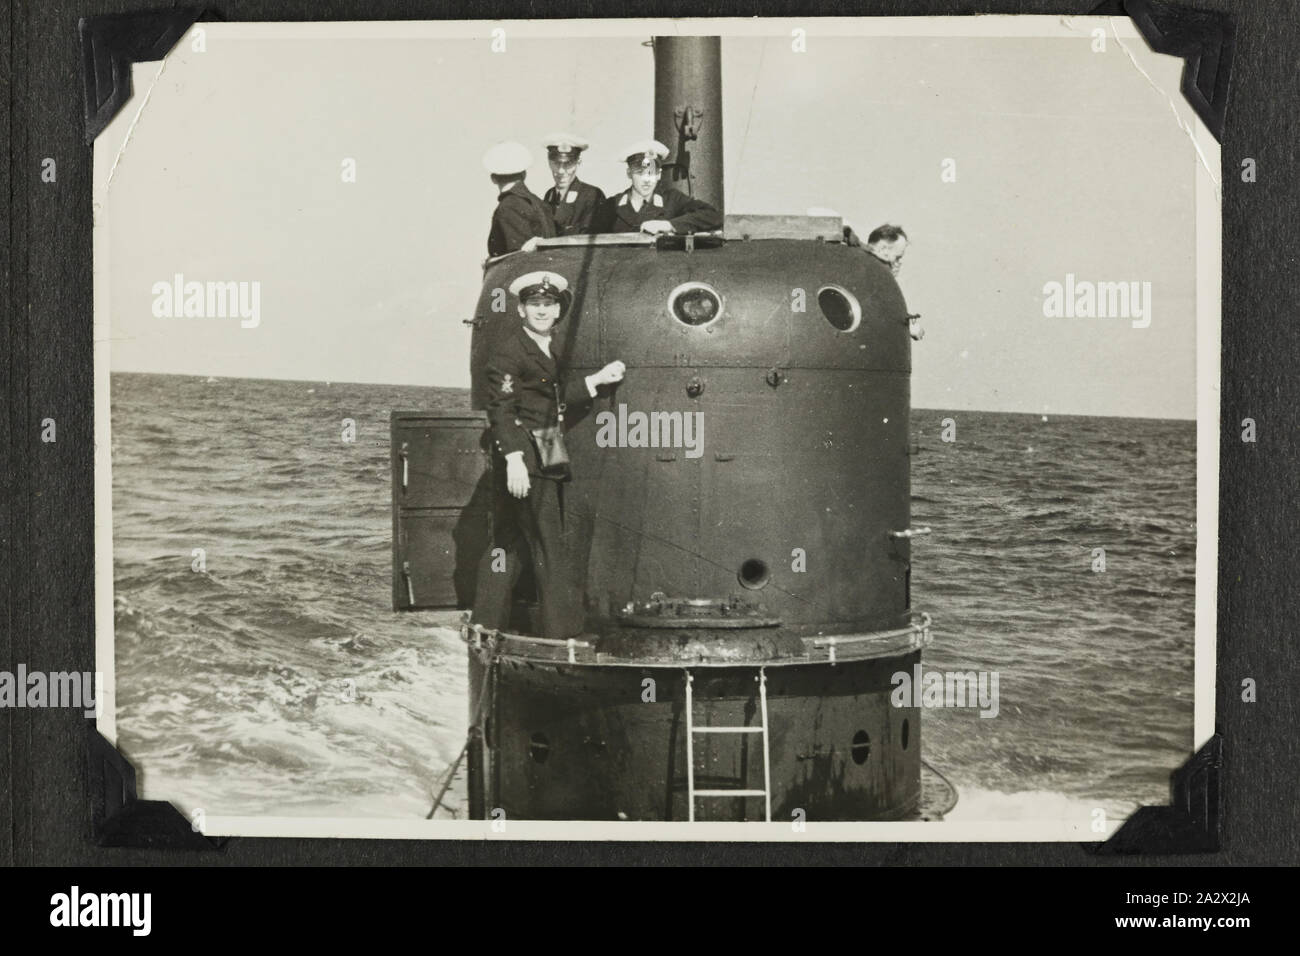 Photograph - 'Conning Tower of a Submarine', 1937-1939, Black and white photograph of the conning tower of a submarine. One of 48 photographs in a photographic album. Taken by D.R. Goodwin, Royal Australian Navy (R.A.N.) 1937-1939. The images are of H.M.A.S Cerberus and other naval ships, naval training and field gun crews Stock Photo